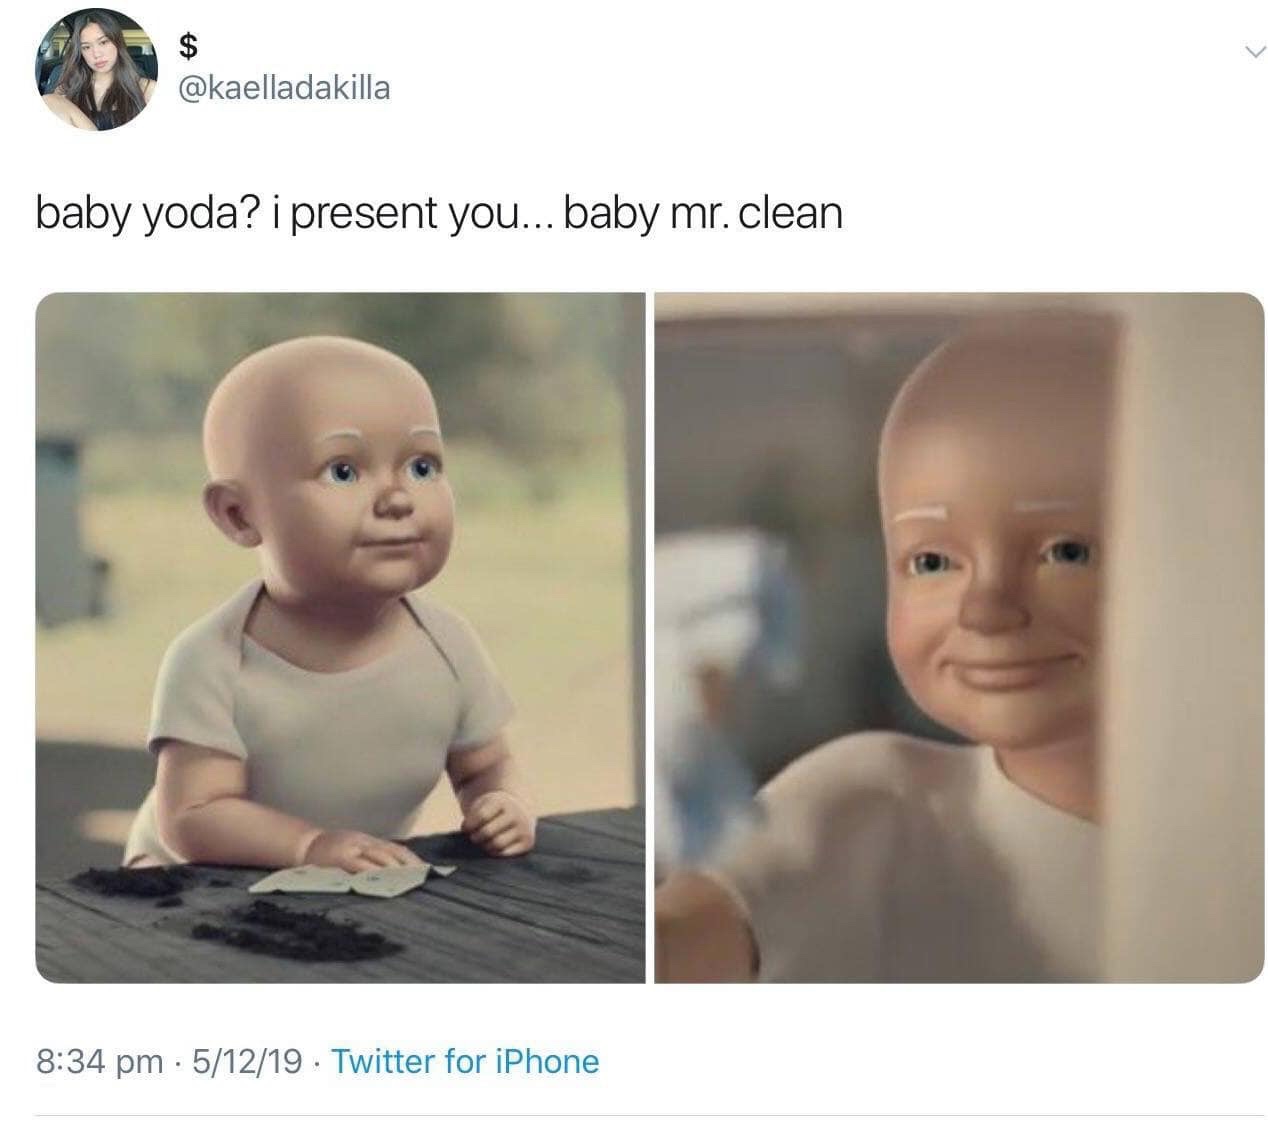 baby mr clean - baby yoda? i present you... baby mr. clean 51219. Twitter for iPhone